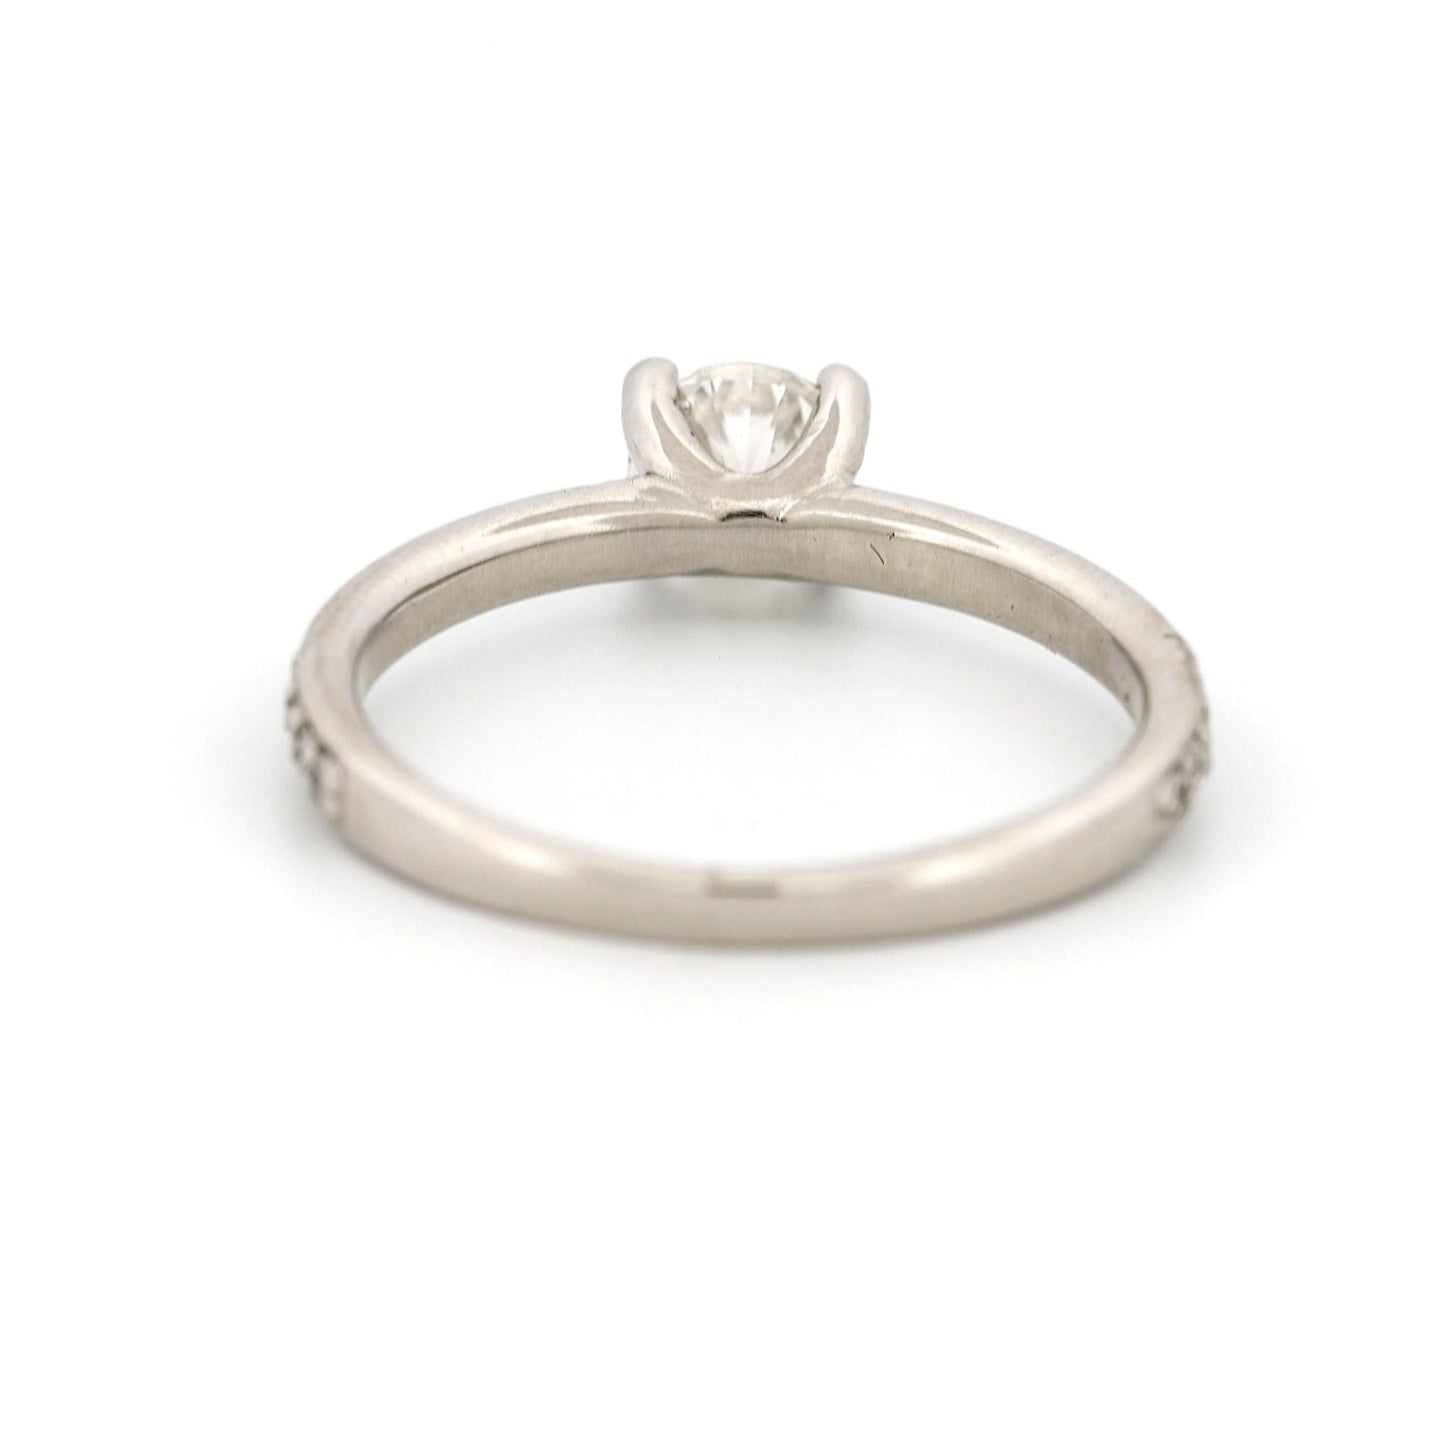 GIA Certified Diamond Engagement Ring in 14k White Gold .53 ct